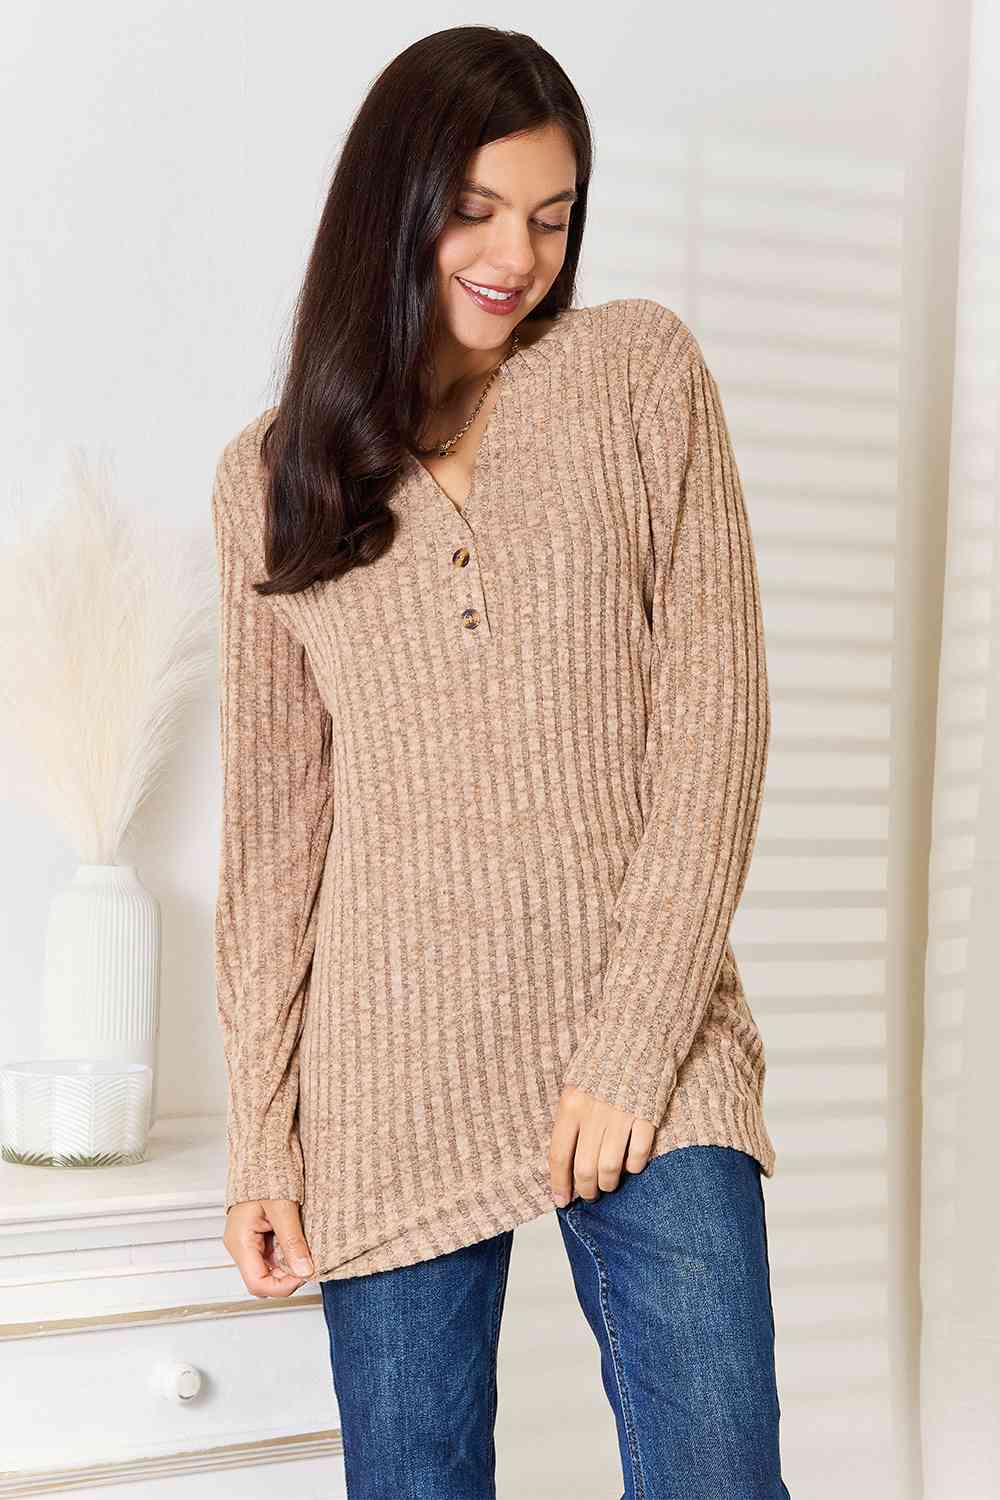 Double Take Notched Neck Ribbed Long Sleeve Top Shirts & Tops Krazy Heart Designs Boutique Khaki S 